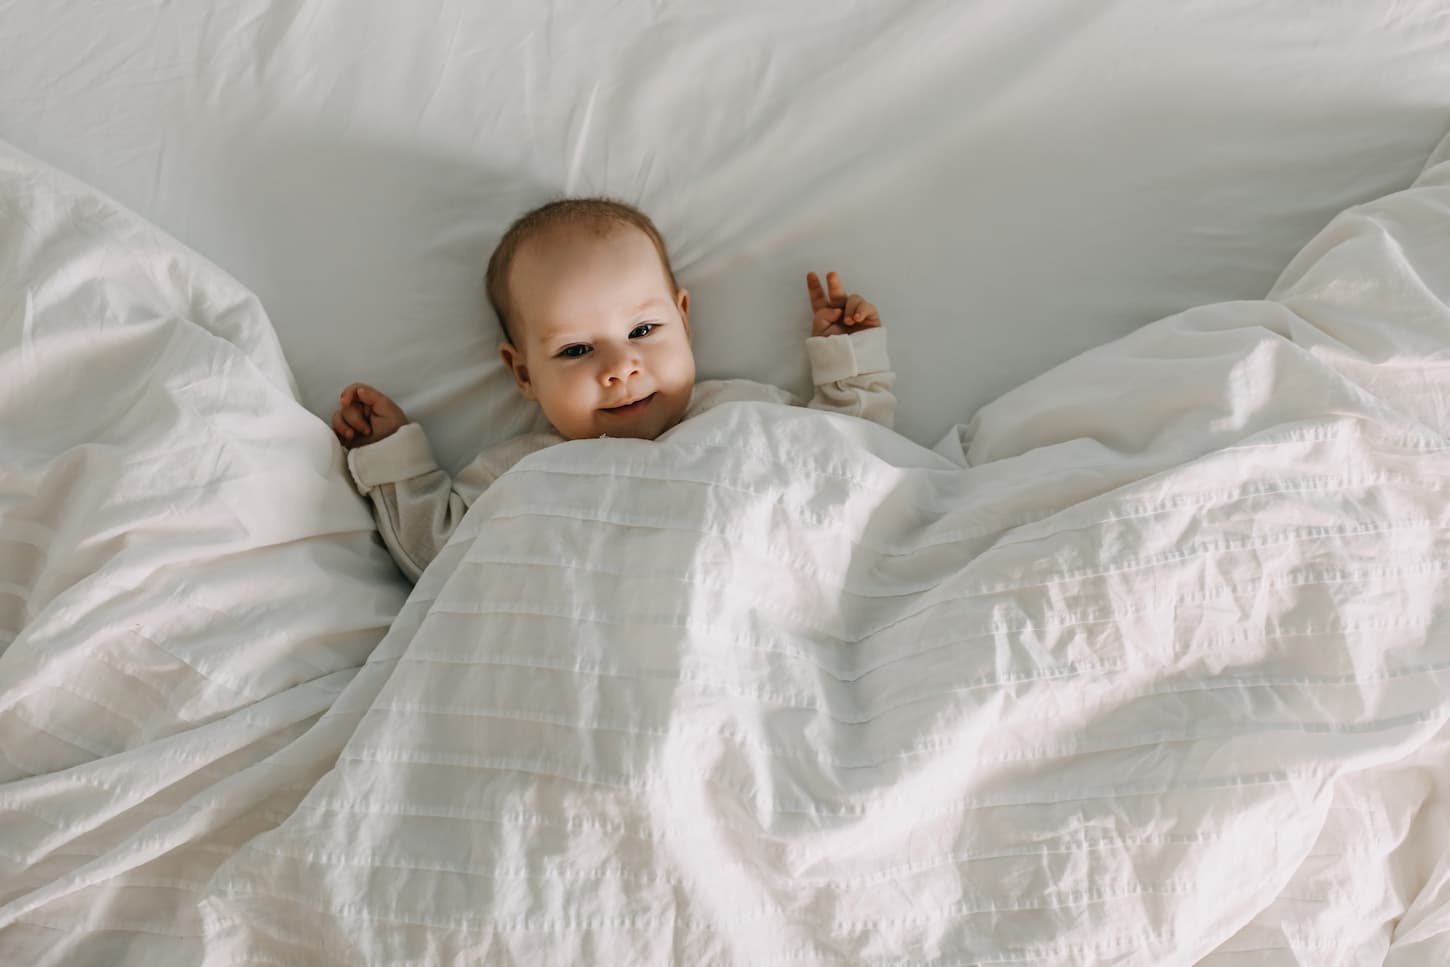 Weighted Blanket for Baby: Is It Safe?